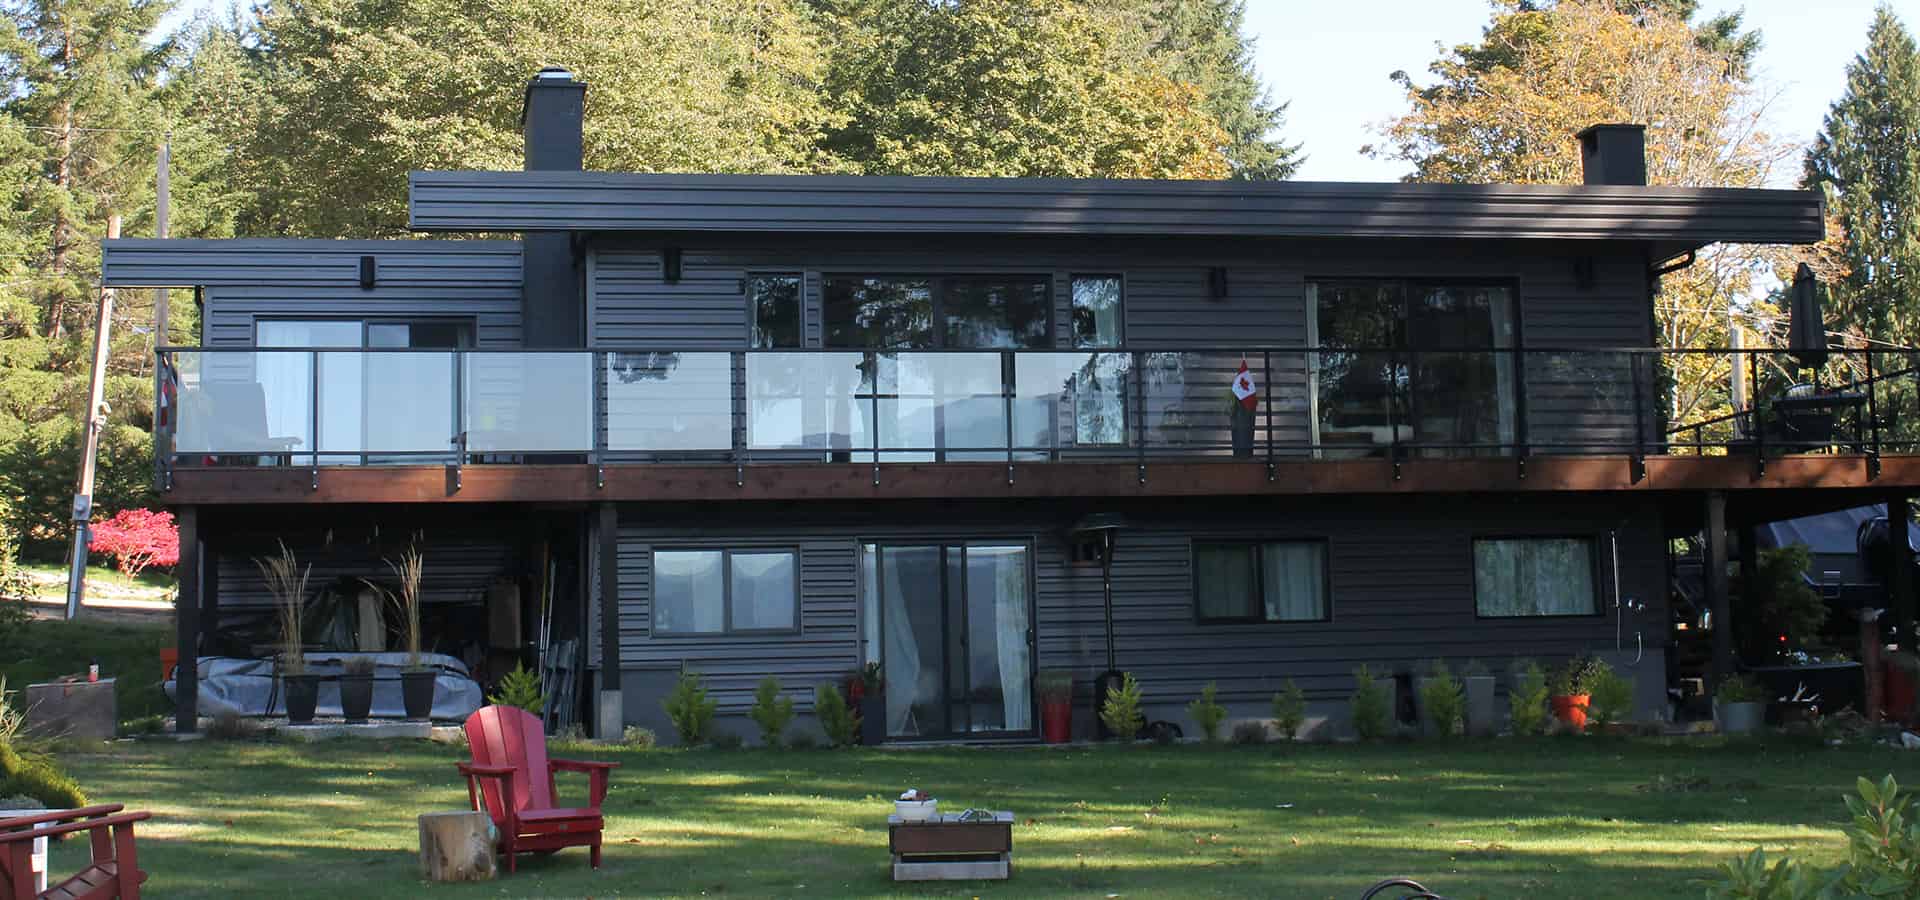 Unique metal siding on our mid-century modern Yellowpoint renovation with custom glass railings.